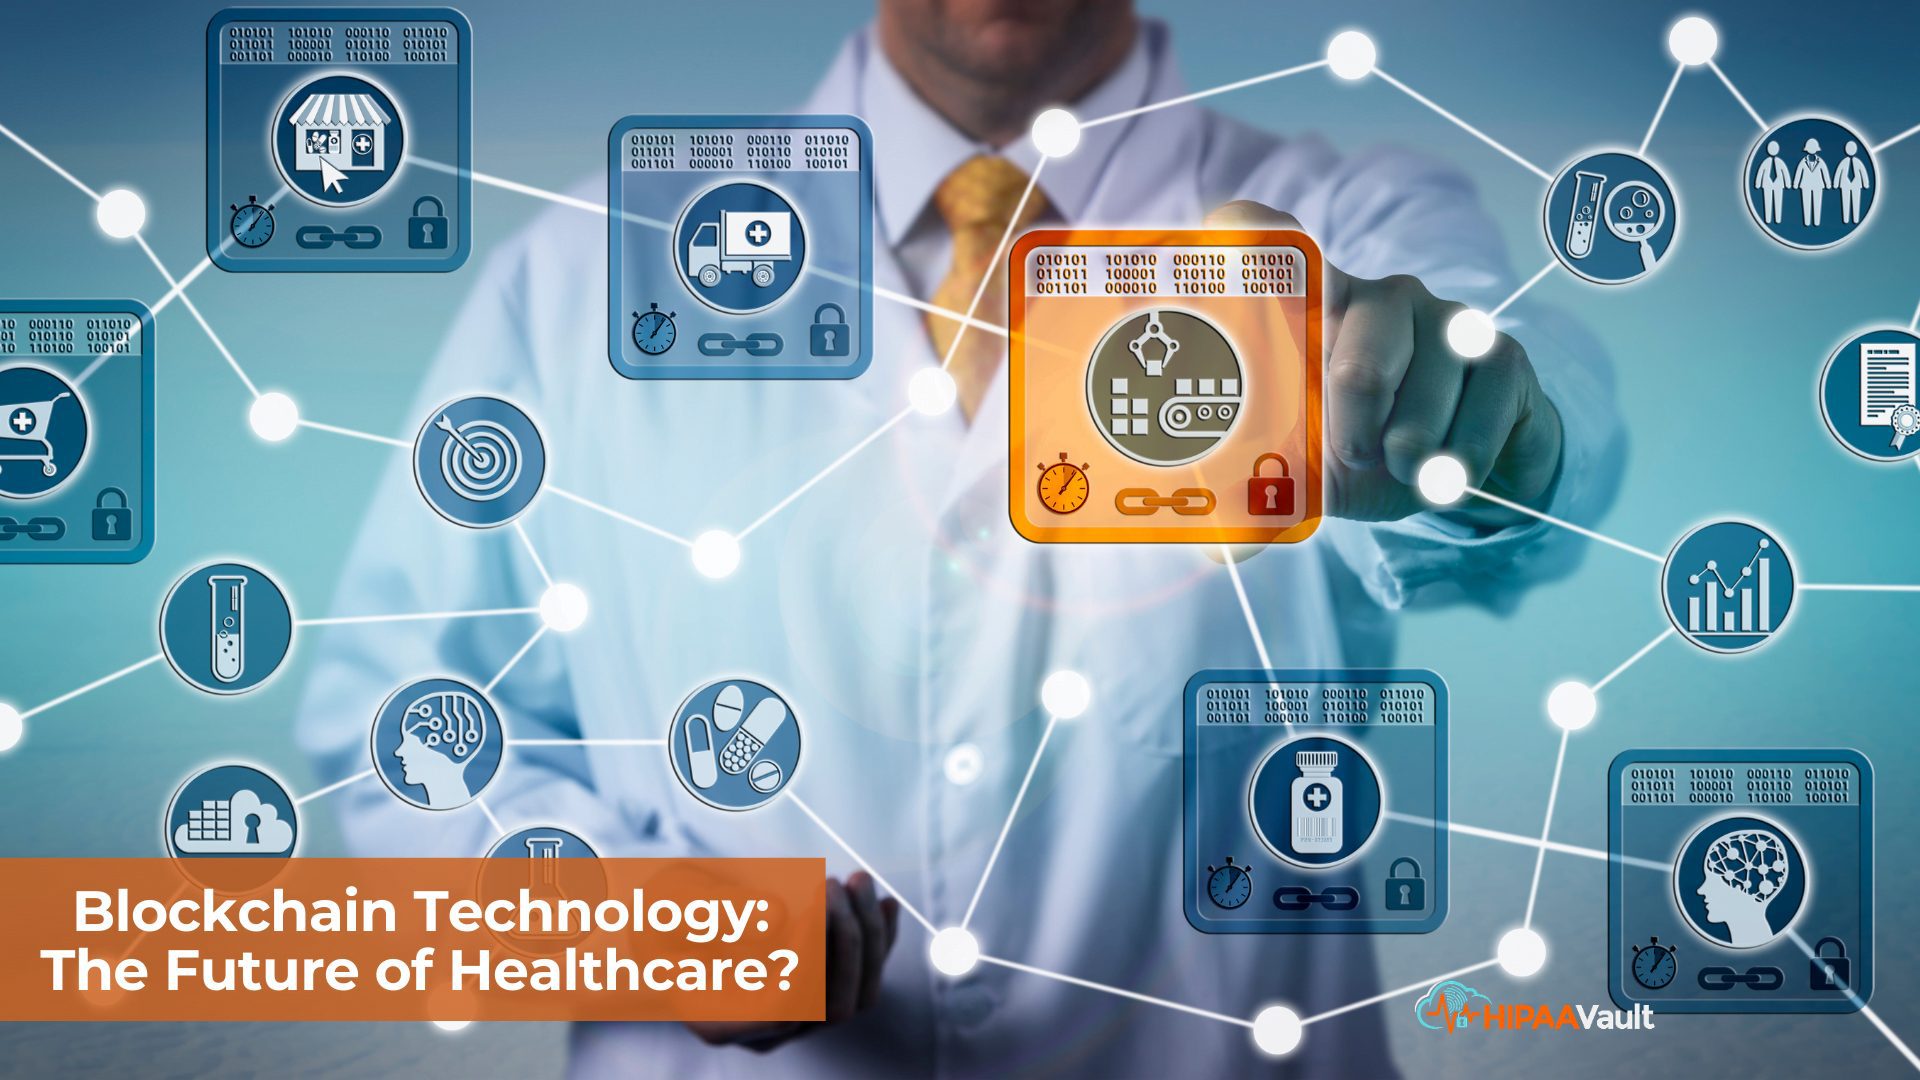 Blockchain Technology and the Future of Healthcare